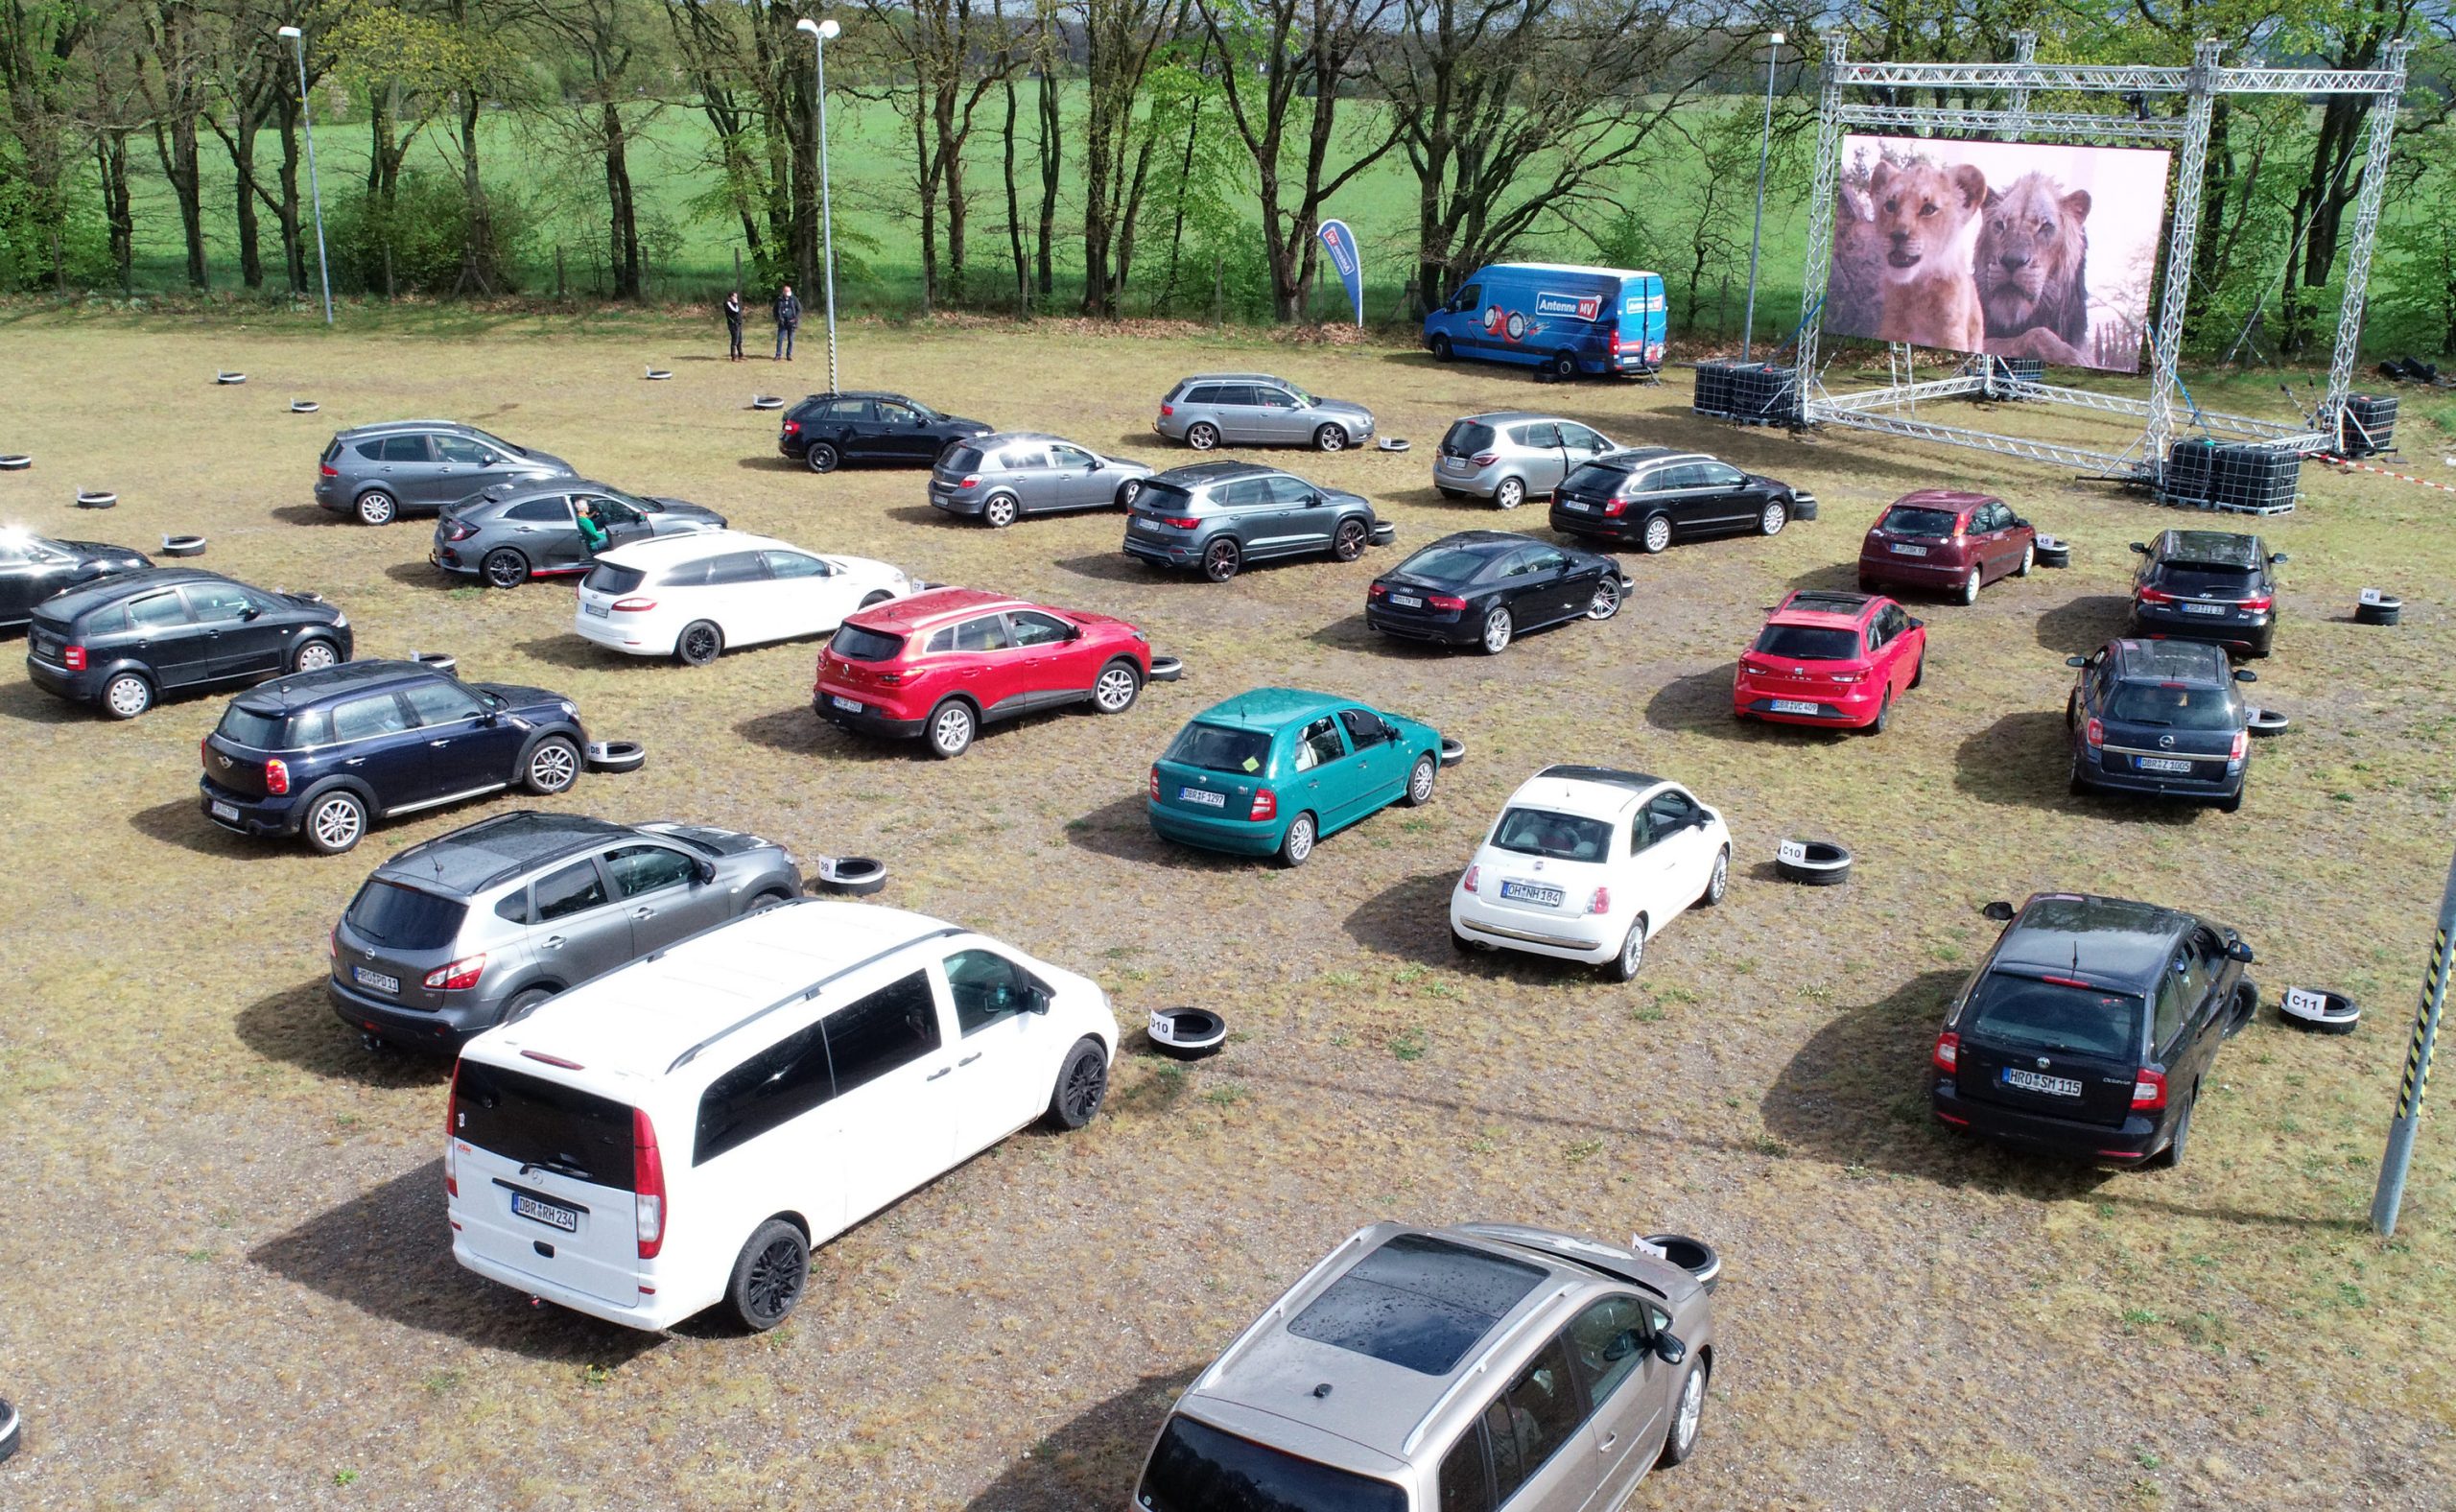 30 April 2020, Mecklenburg-Western Pomerania, Bad Doberan: Cars park in a drive-in cinema to watch the "Lion King" movie. Due to the coronavirus pandemic, normal cinemas are closed and more drive-in cinemas are opening. Photo: Bernd Wüstneck/dpa-Zentralbild/dpa